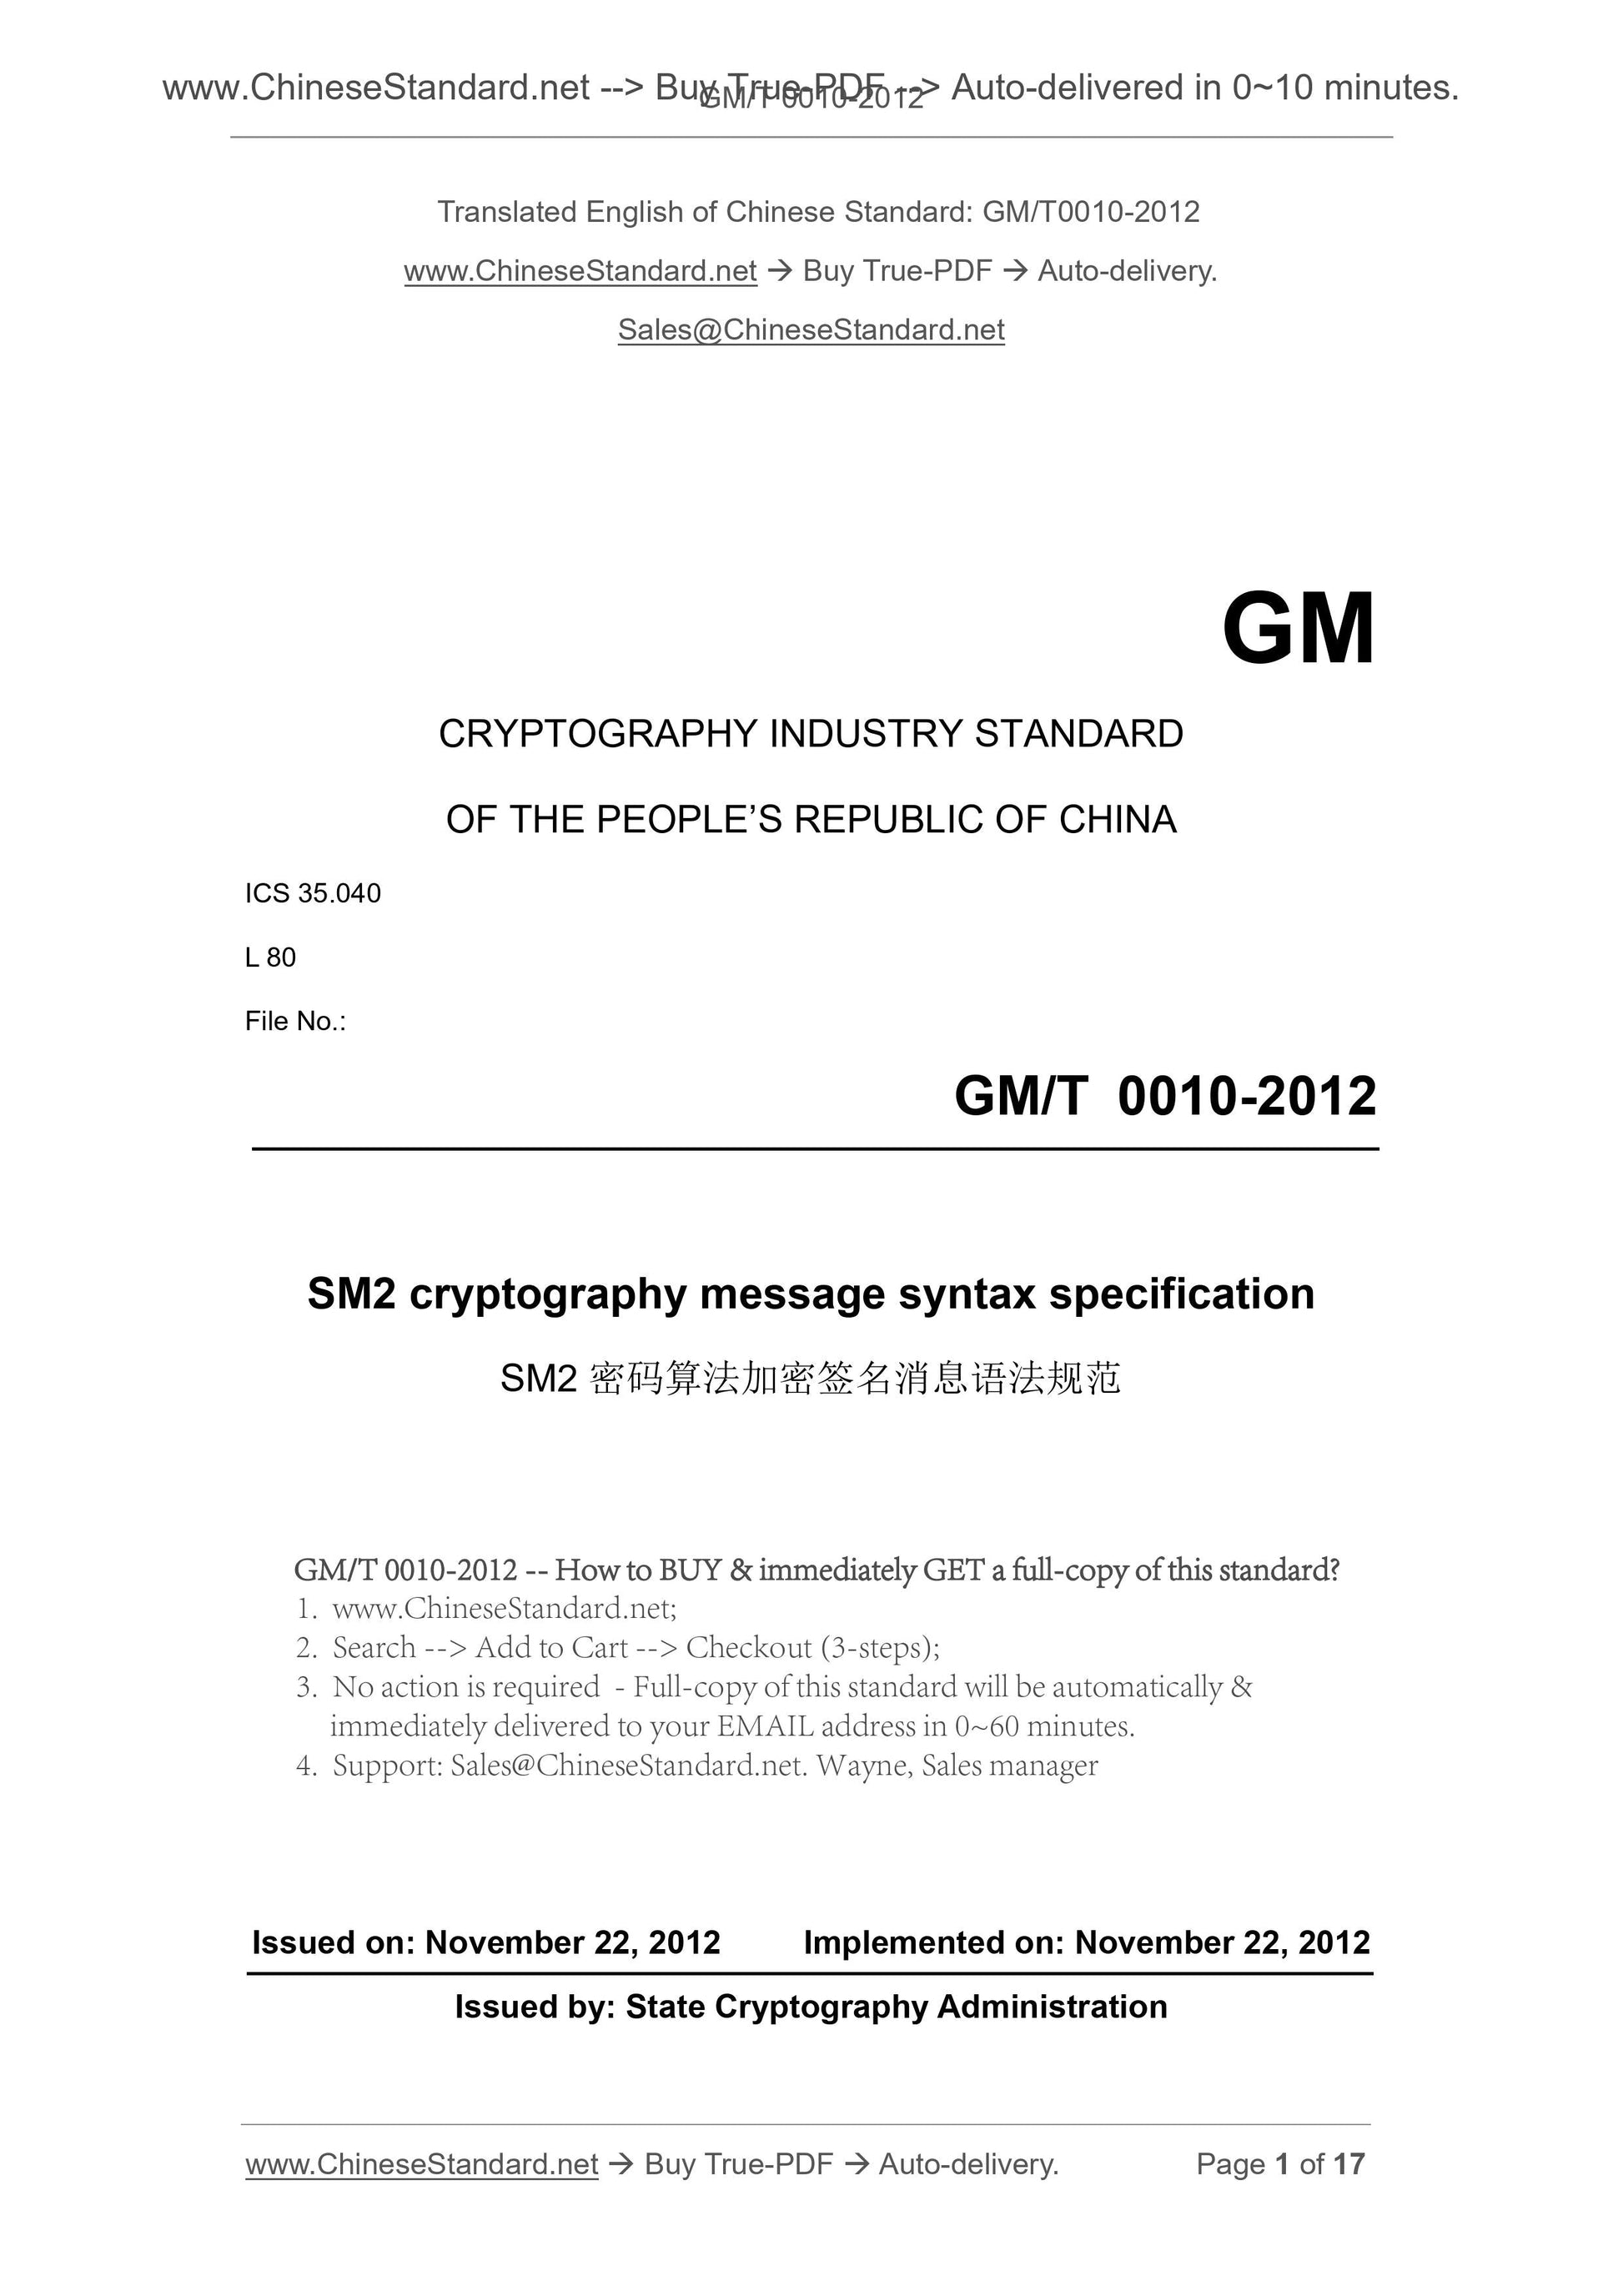 GM/T 0010-2012 Page 1